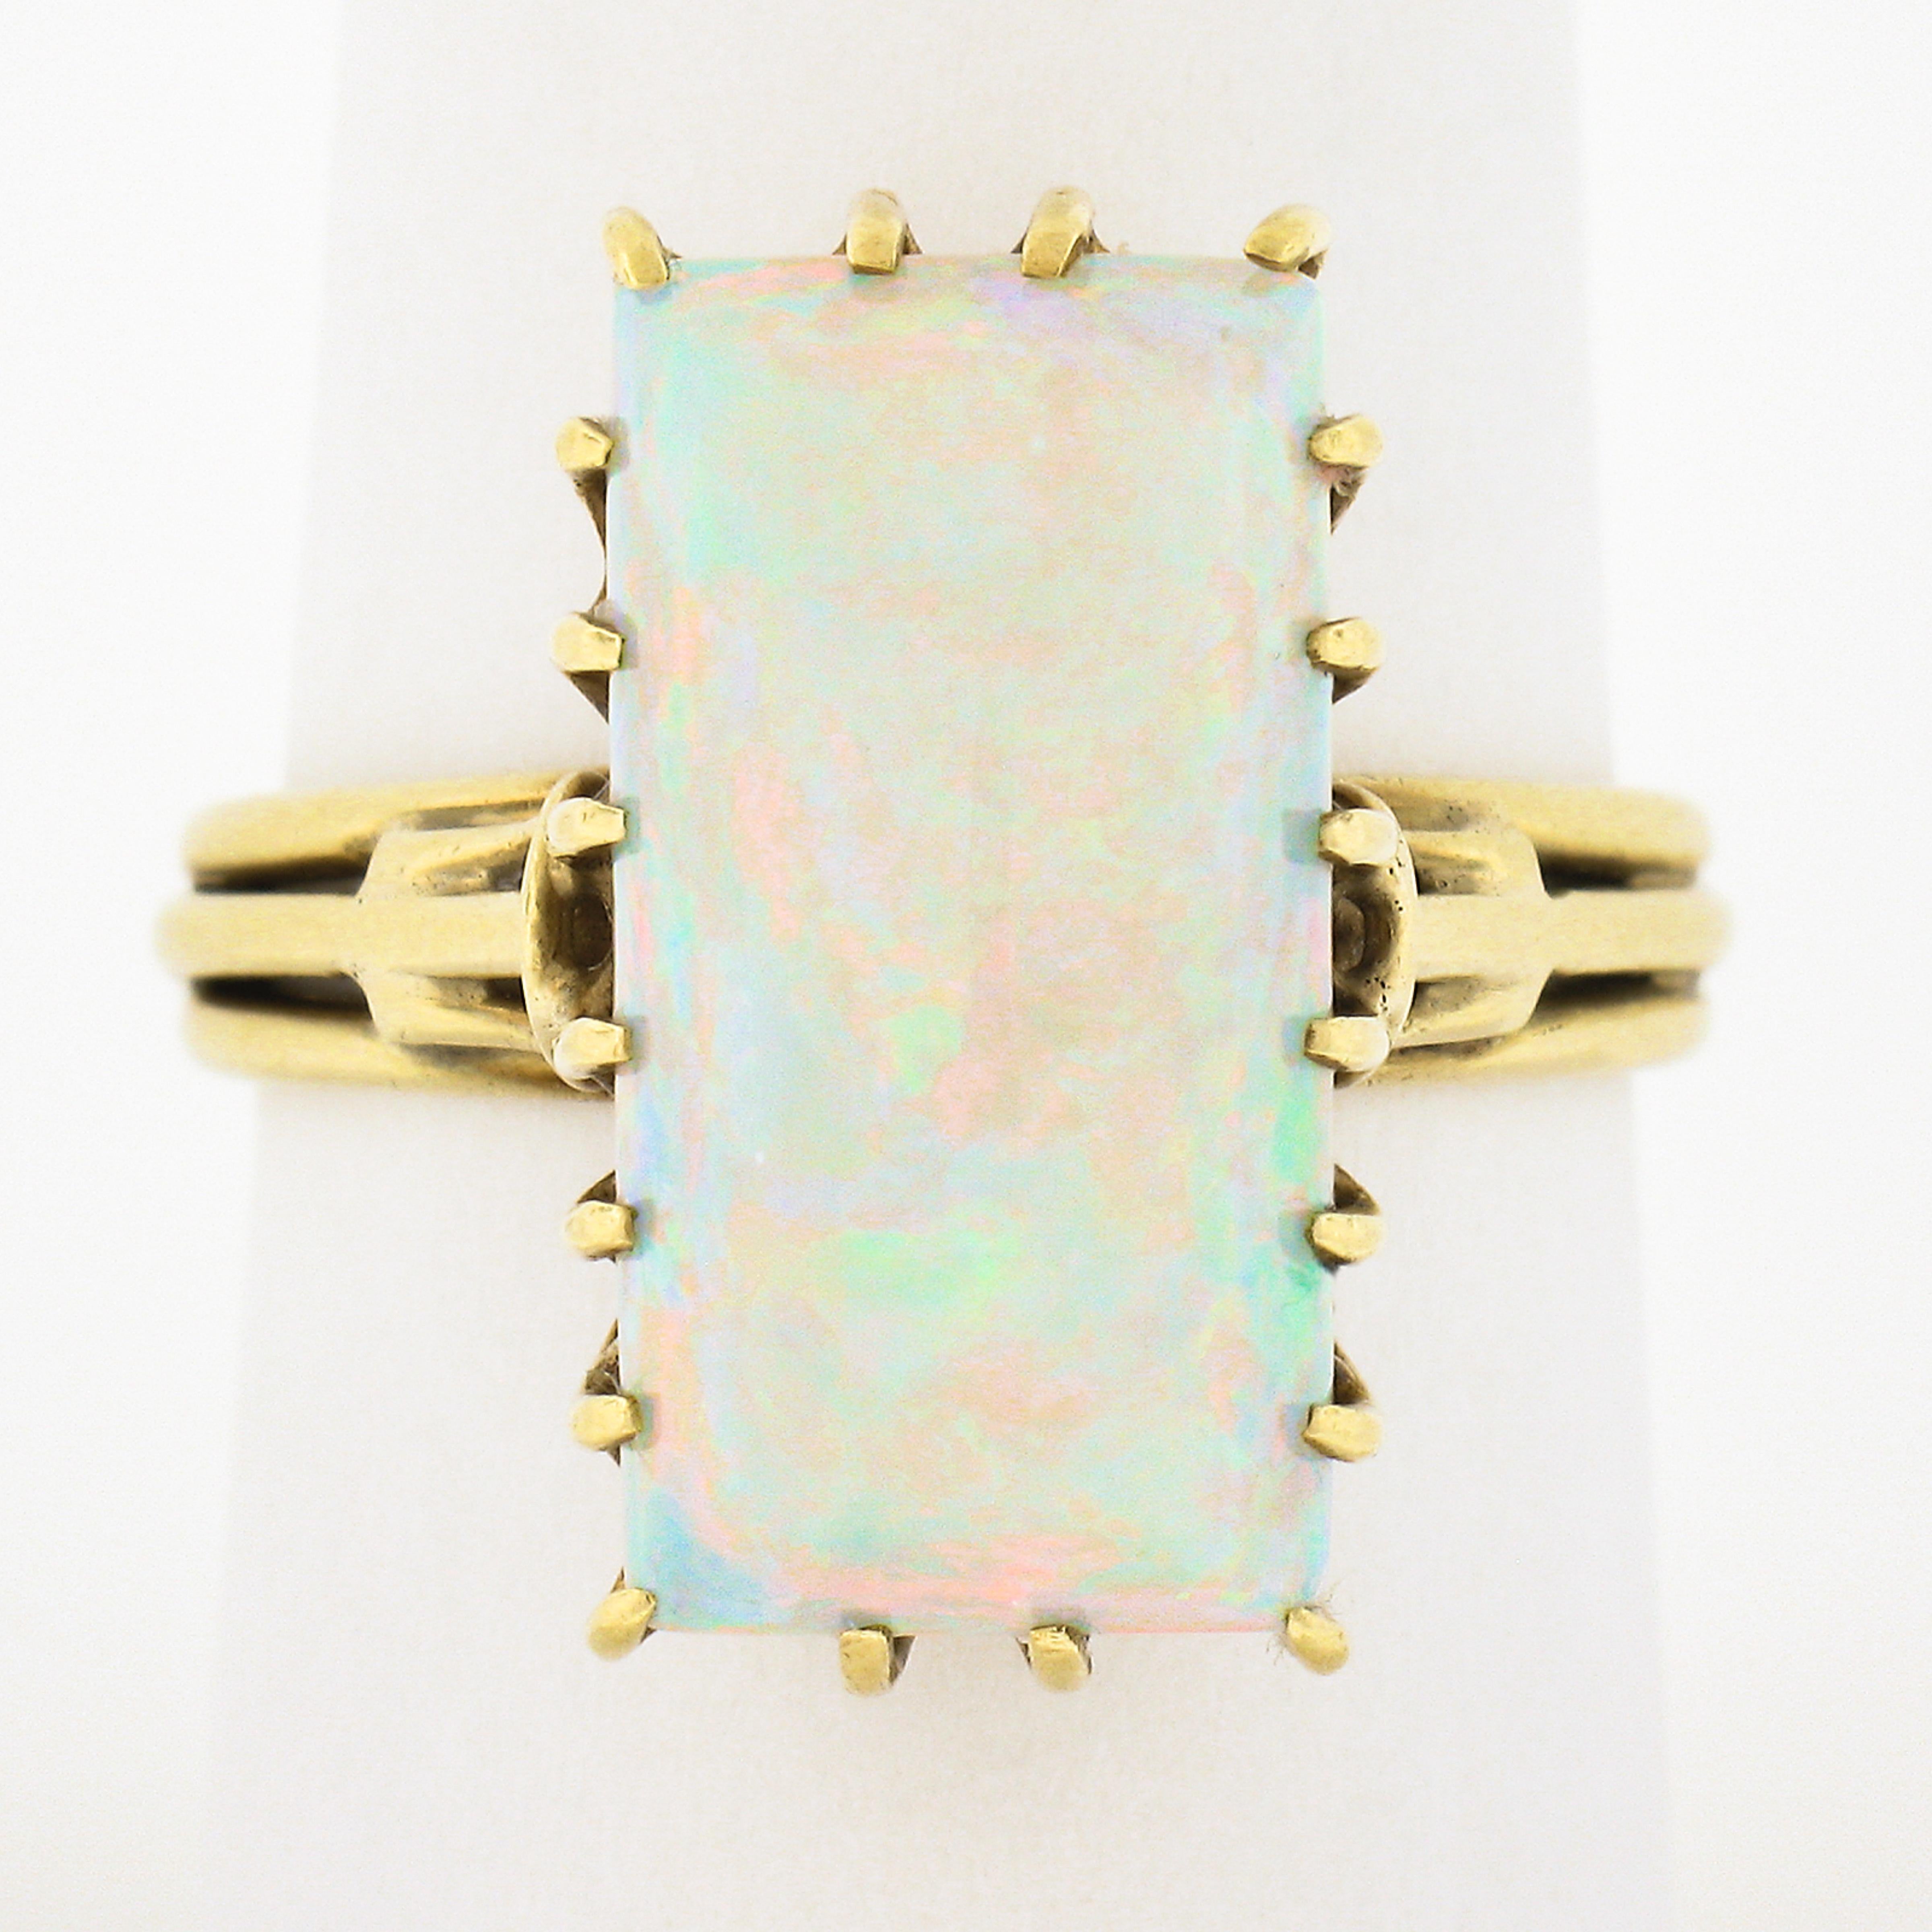 This spectacular, handmade, vintage ring is crafted in solid 18k yellow gold and features a breathtaking opal gemstone neatly and elegantly multi-prong set at the center of the open wore basket setting. The white opal has no crazing, and displays